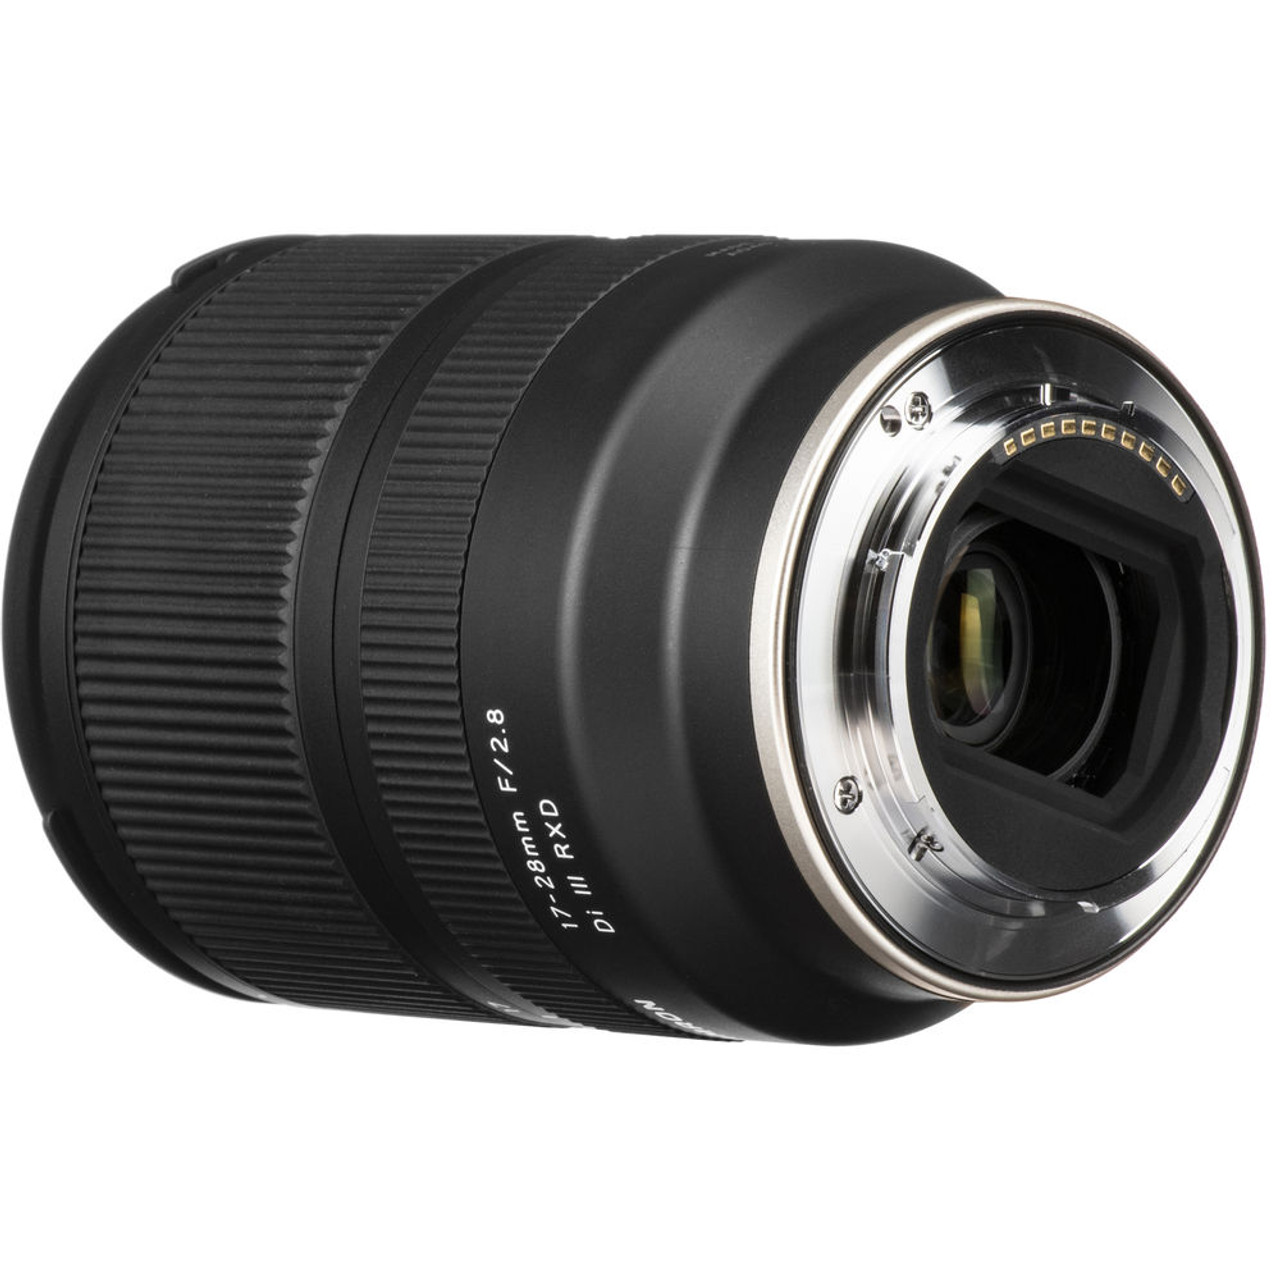 Tamron 17-28mm f/2.8 Di III RXD Lens for Sony E (25211460015